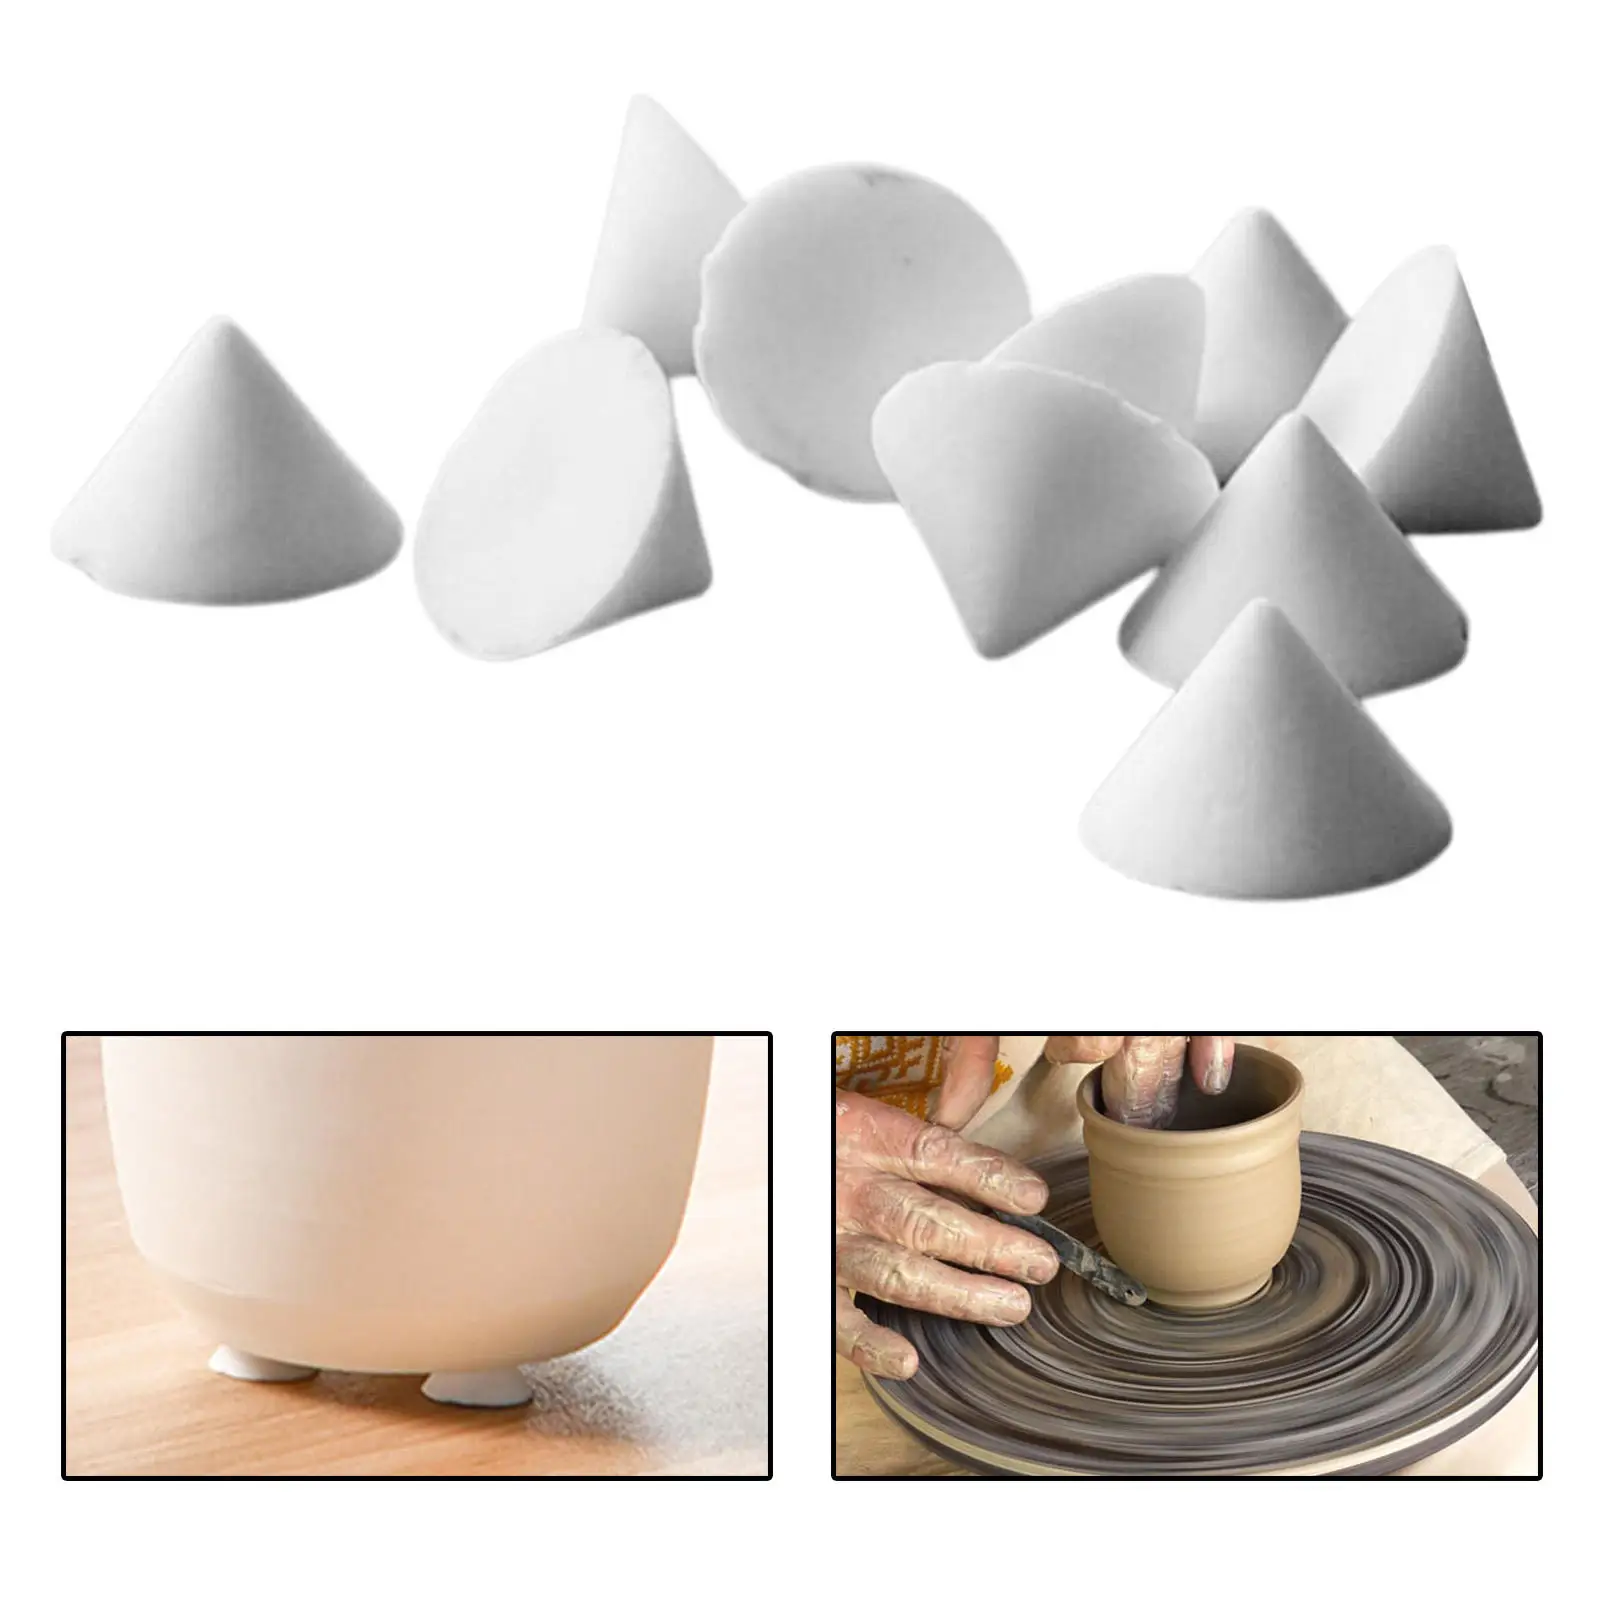 10pcs/set Moveable Nails Ceramic Refractory Support Nails High Temperature Resistant Material Pottery Tools Kiln Tool